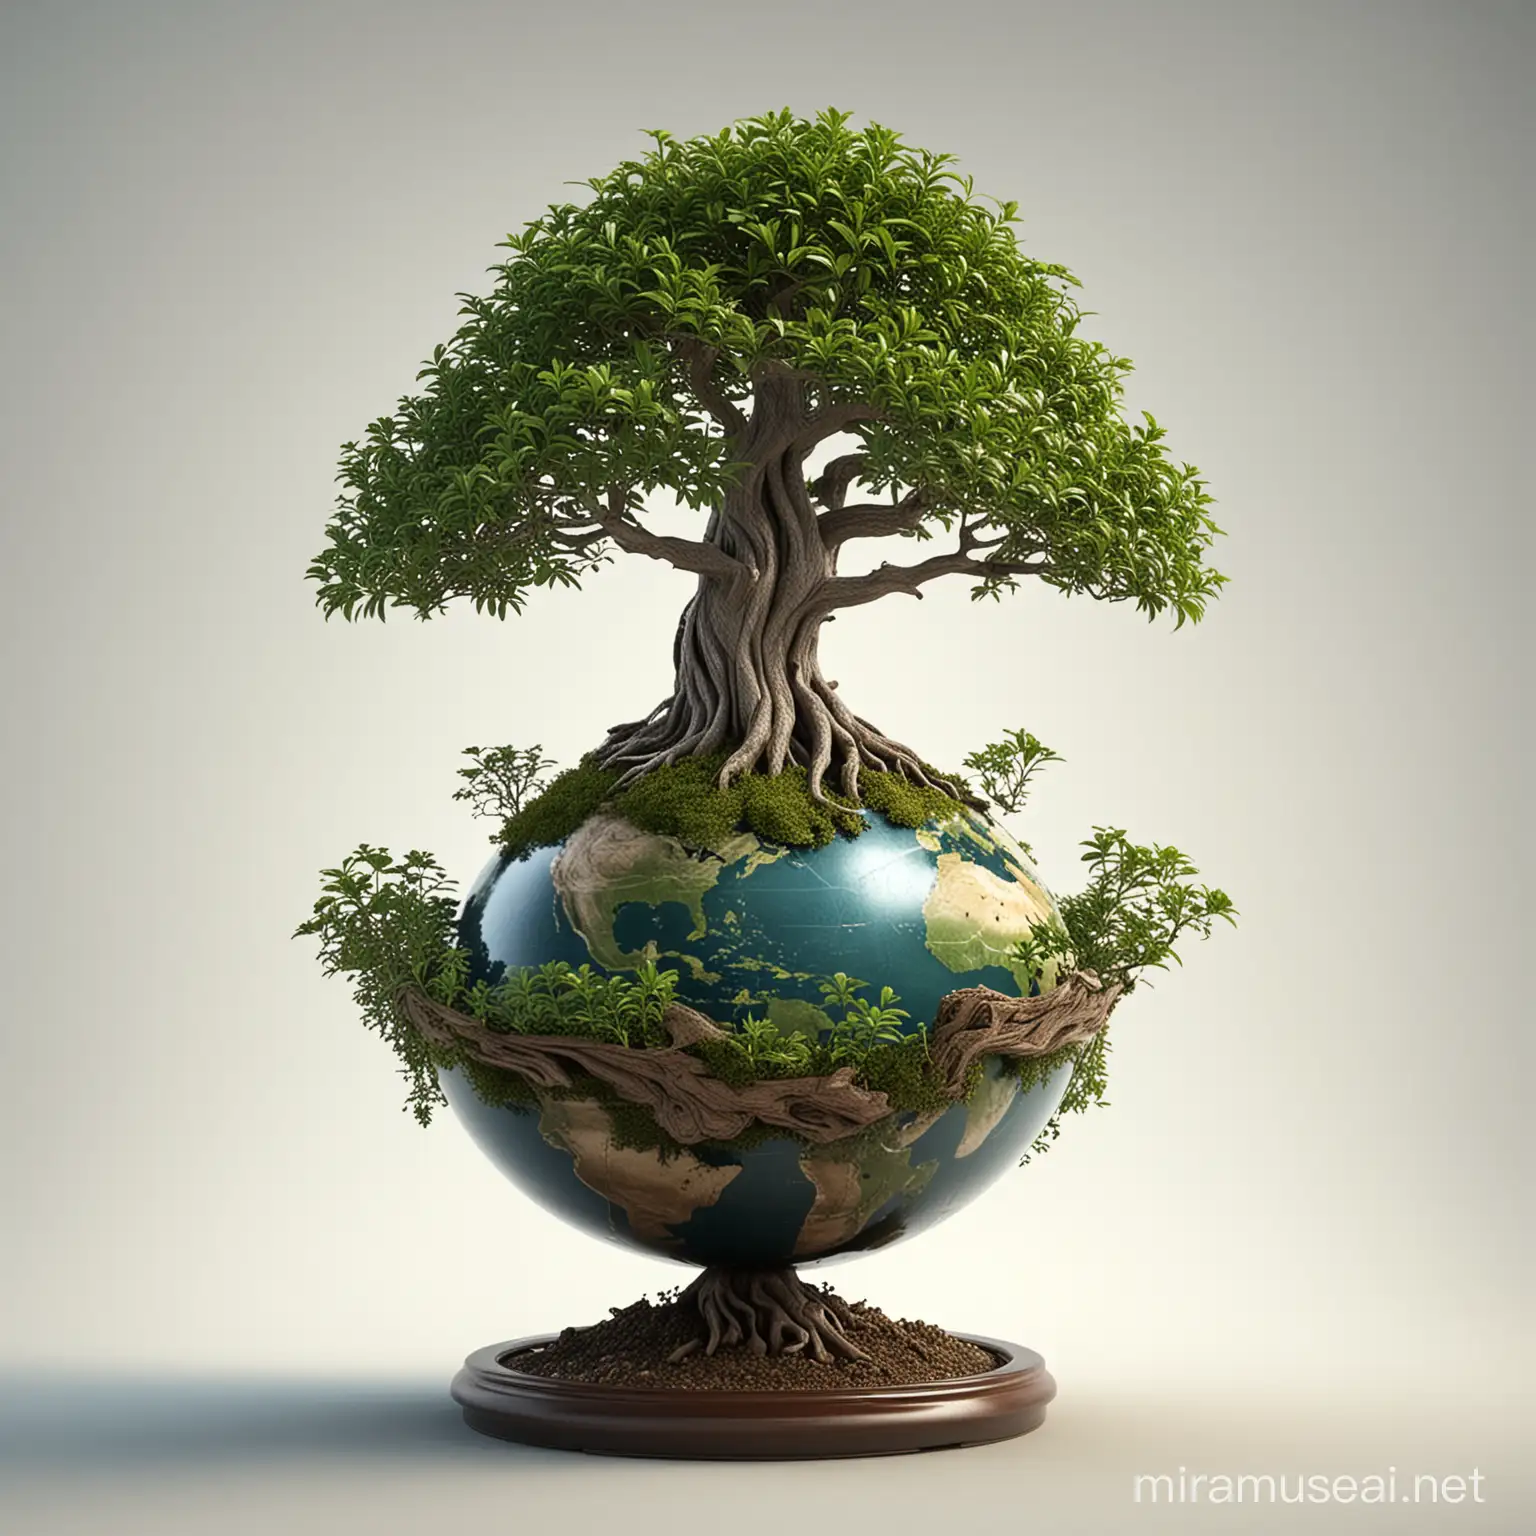 Create a photorealistic image of a small, lush bonsai tree with green leaves growing out of a globe that looks like the Earth. The bonsai tree is planted directly on top of the globe, which should have detailed and accurate geographical features of continents and oceans. Below the globe, include a pair of human hands gently cradling it from below. The background should be plain white to emphasize the subjects. The image symbolizes environmental care and the nurturing of nature in relation to the world, 32k render, hyperrealistic, detailed.